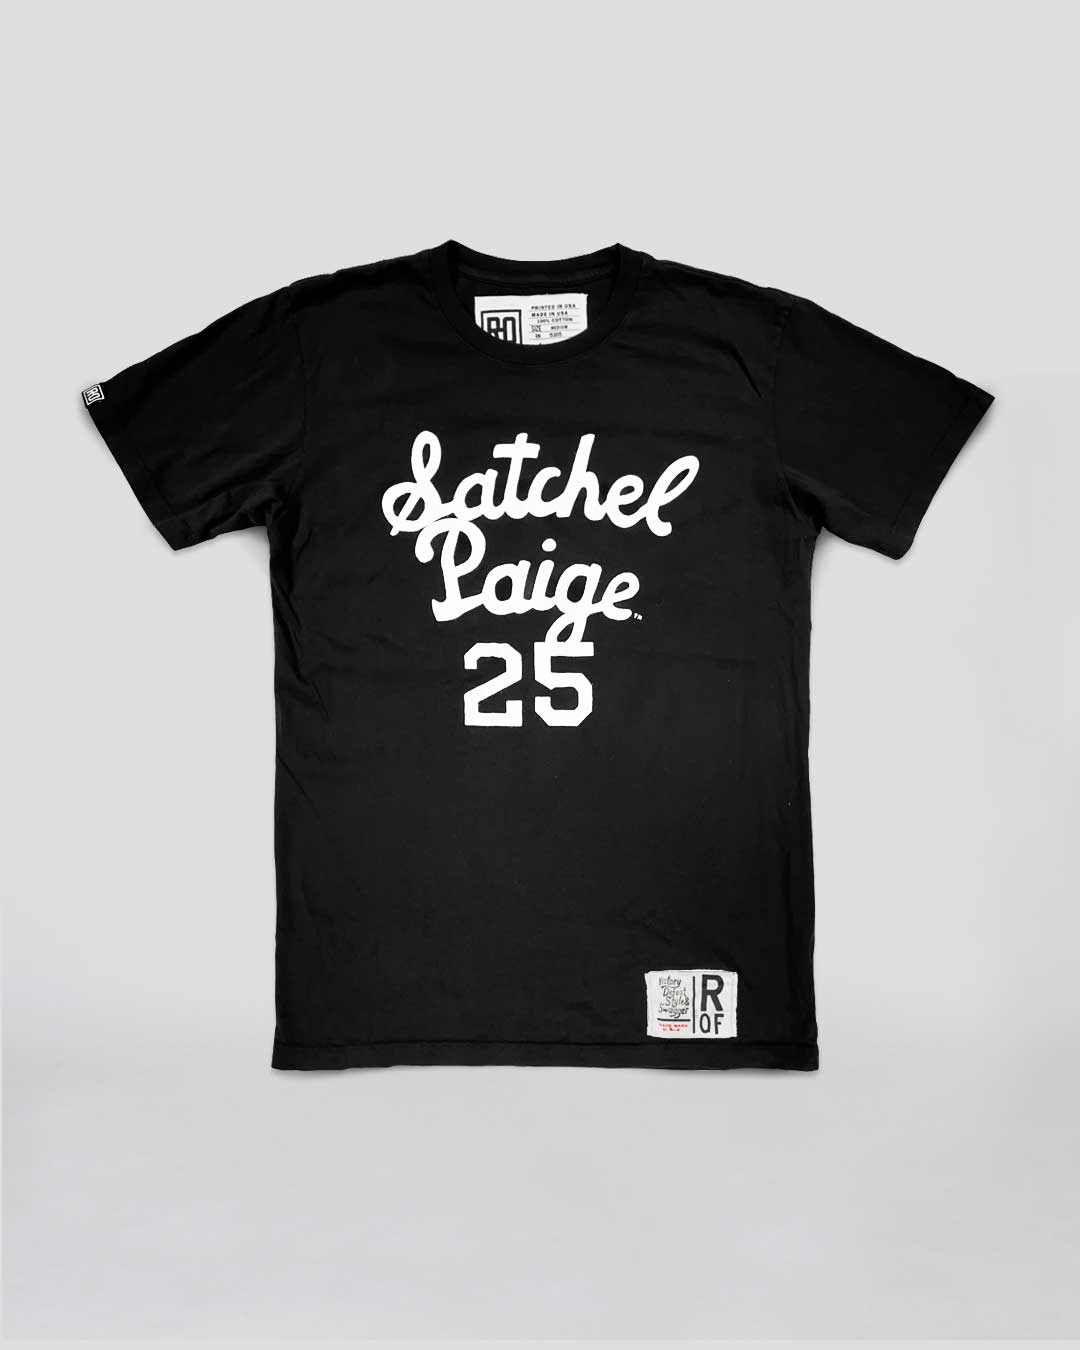 Satchel Paige 25 Tee - Roots of Fight